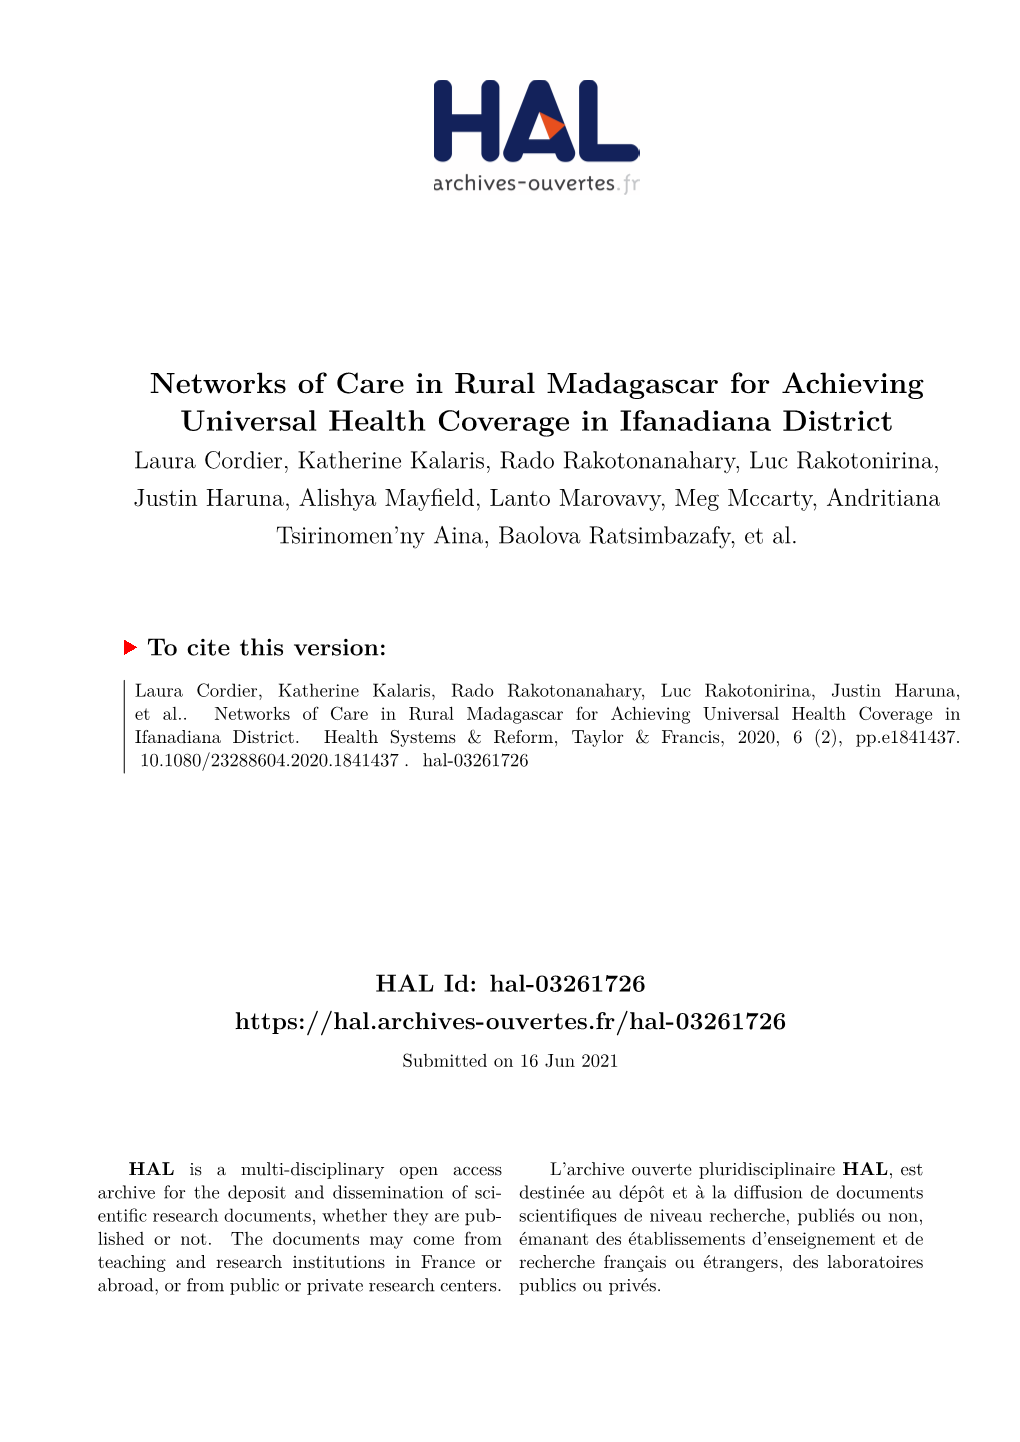 Networks of Care in Rural Madagascar for Achieving